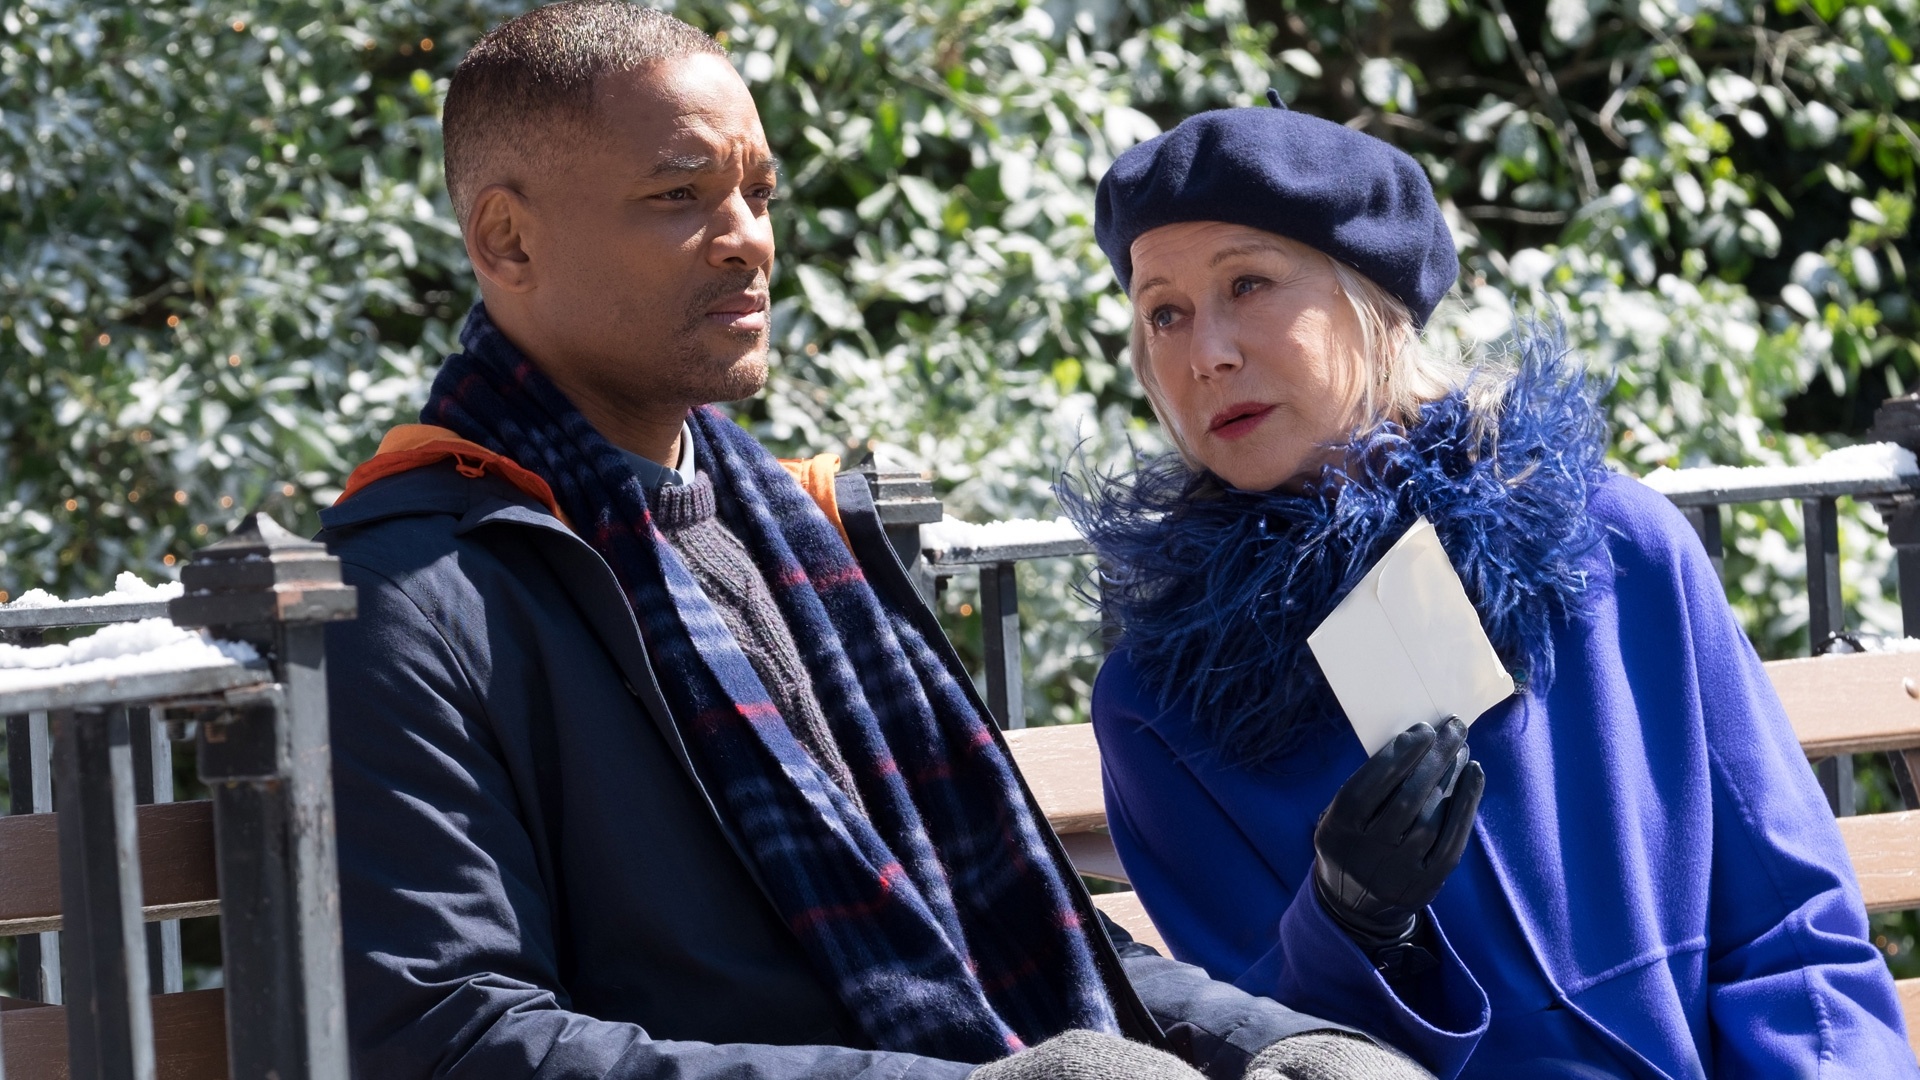 Collateral Beauty film, Emotional journey, Profound impact, Life's true beauty, 1920x1080 Full HD Desktop